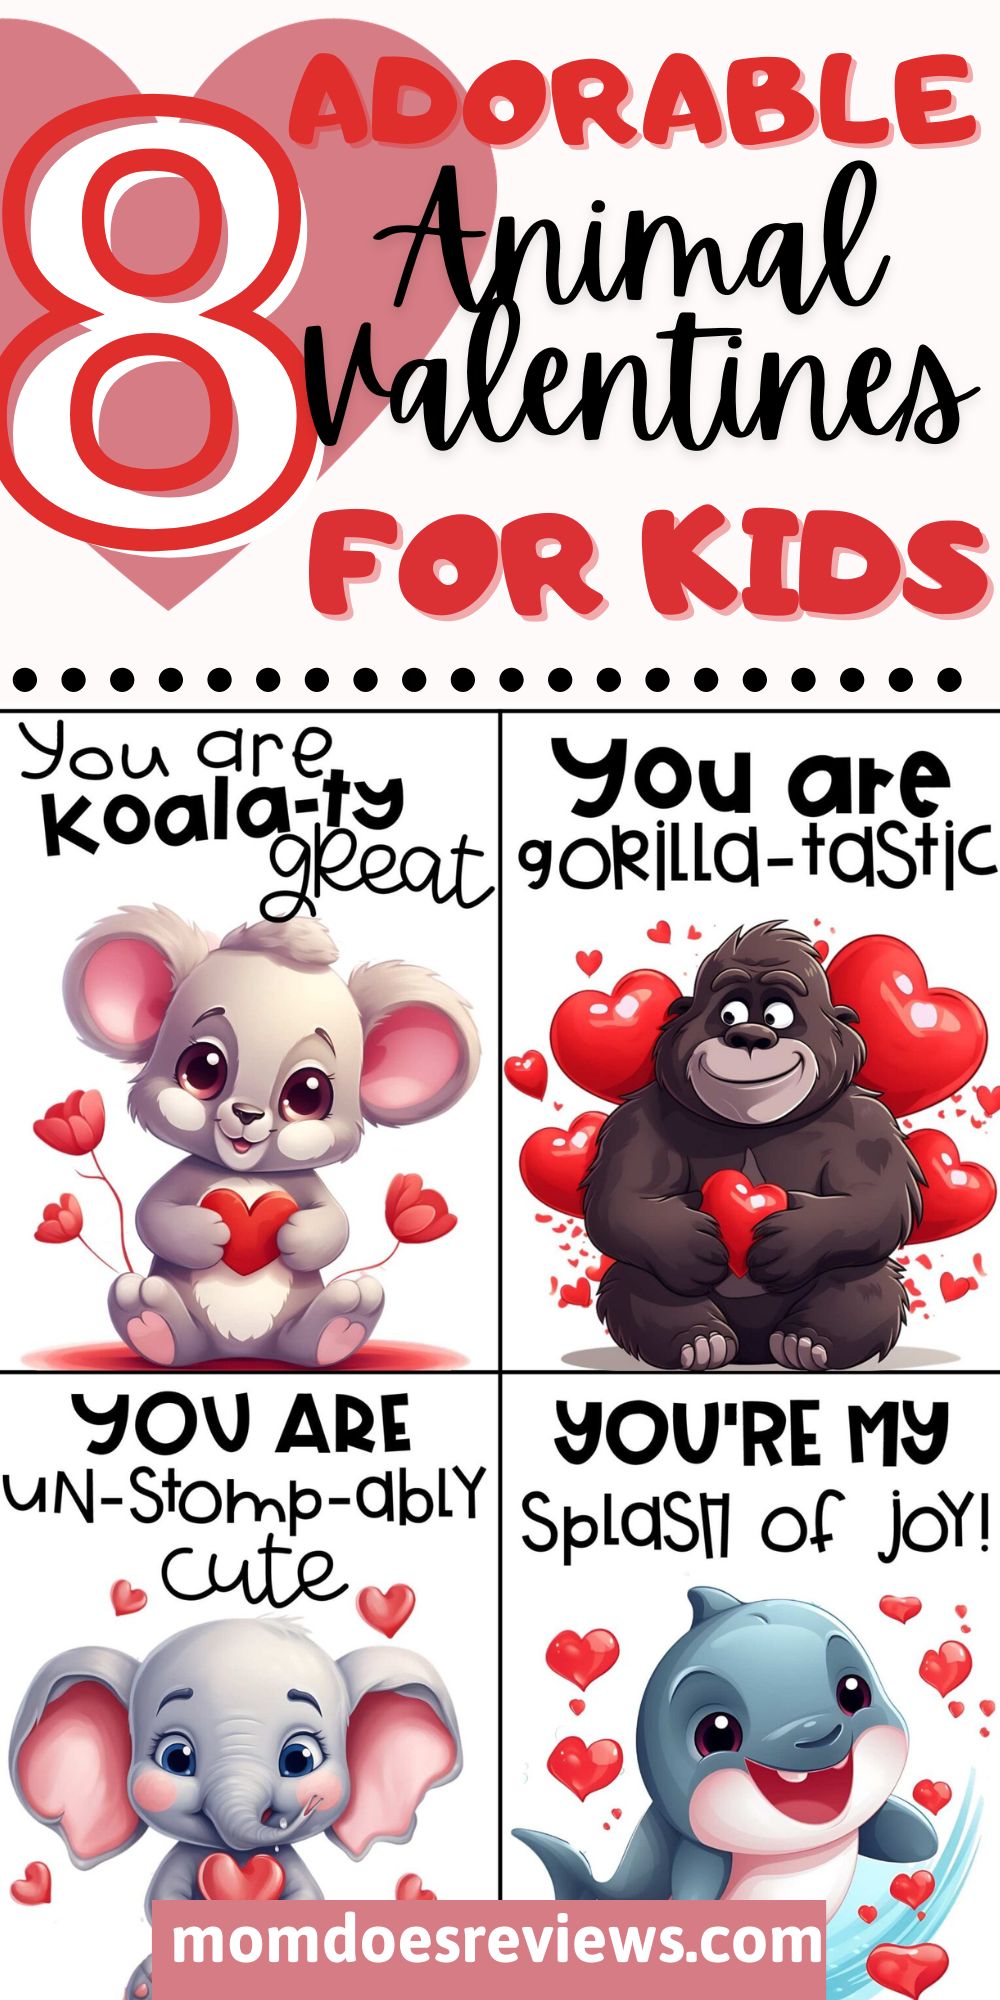 Adorable Animal Valentine's Day Cards